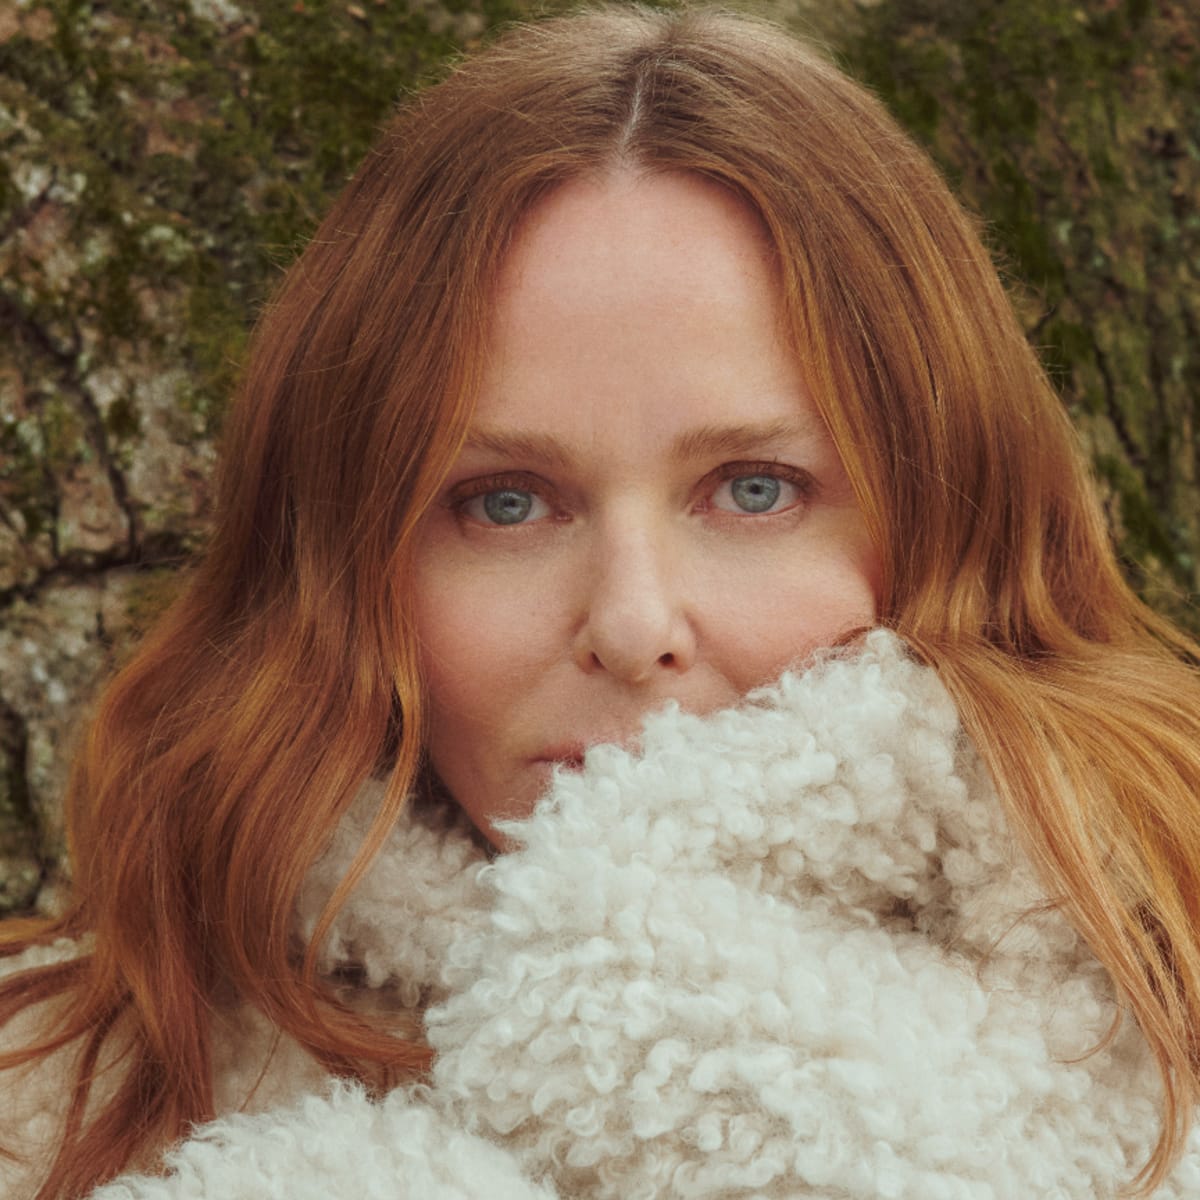 Stella McCartney Is Getting Into Skin Care With a New 'Conscious